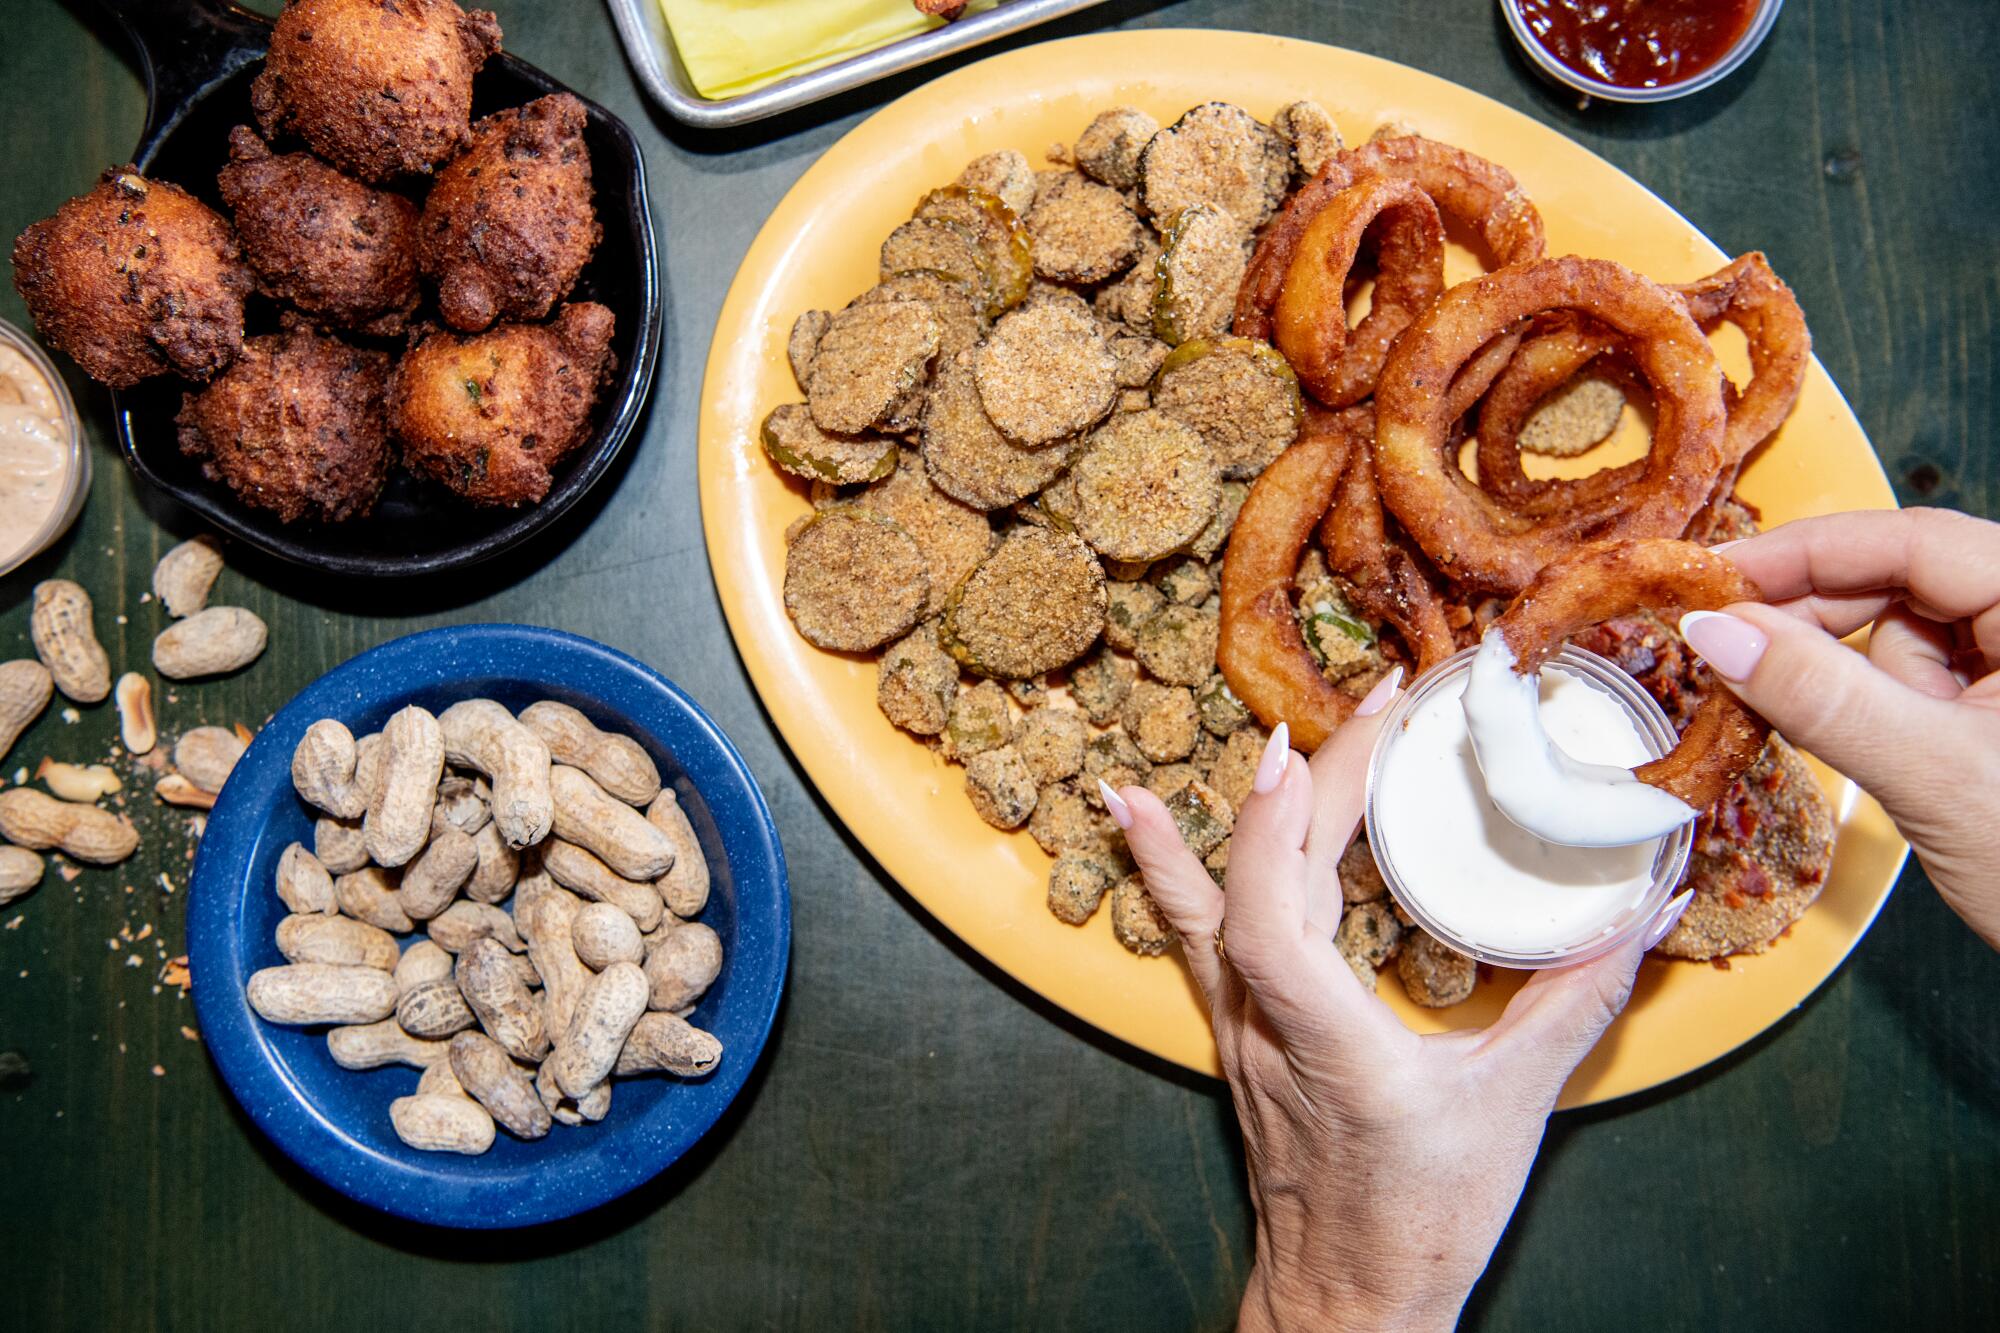 Hush puppies and the Whole South Sampler platter.